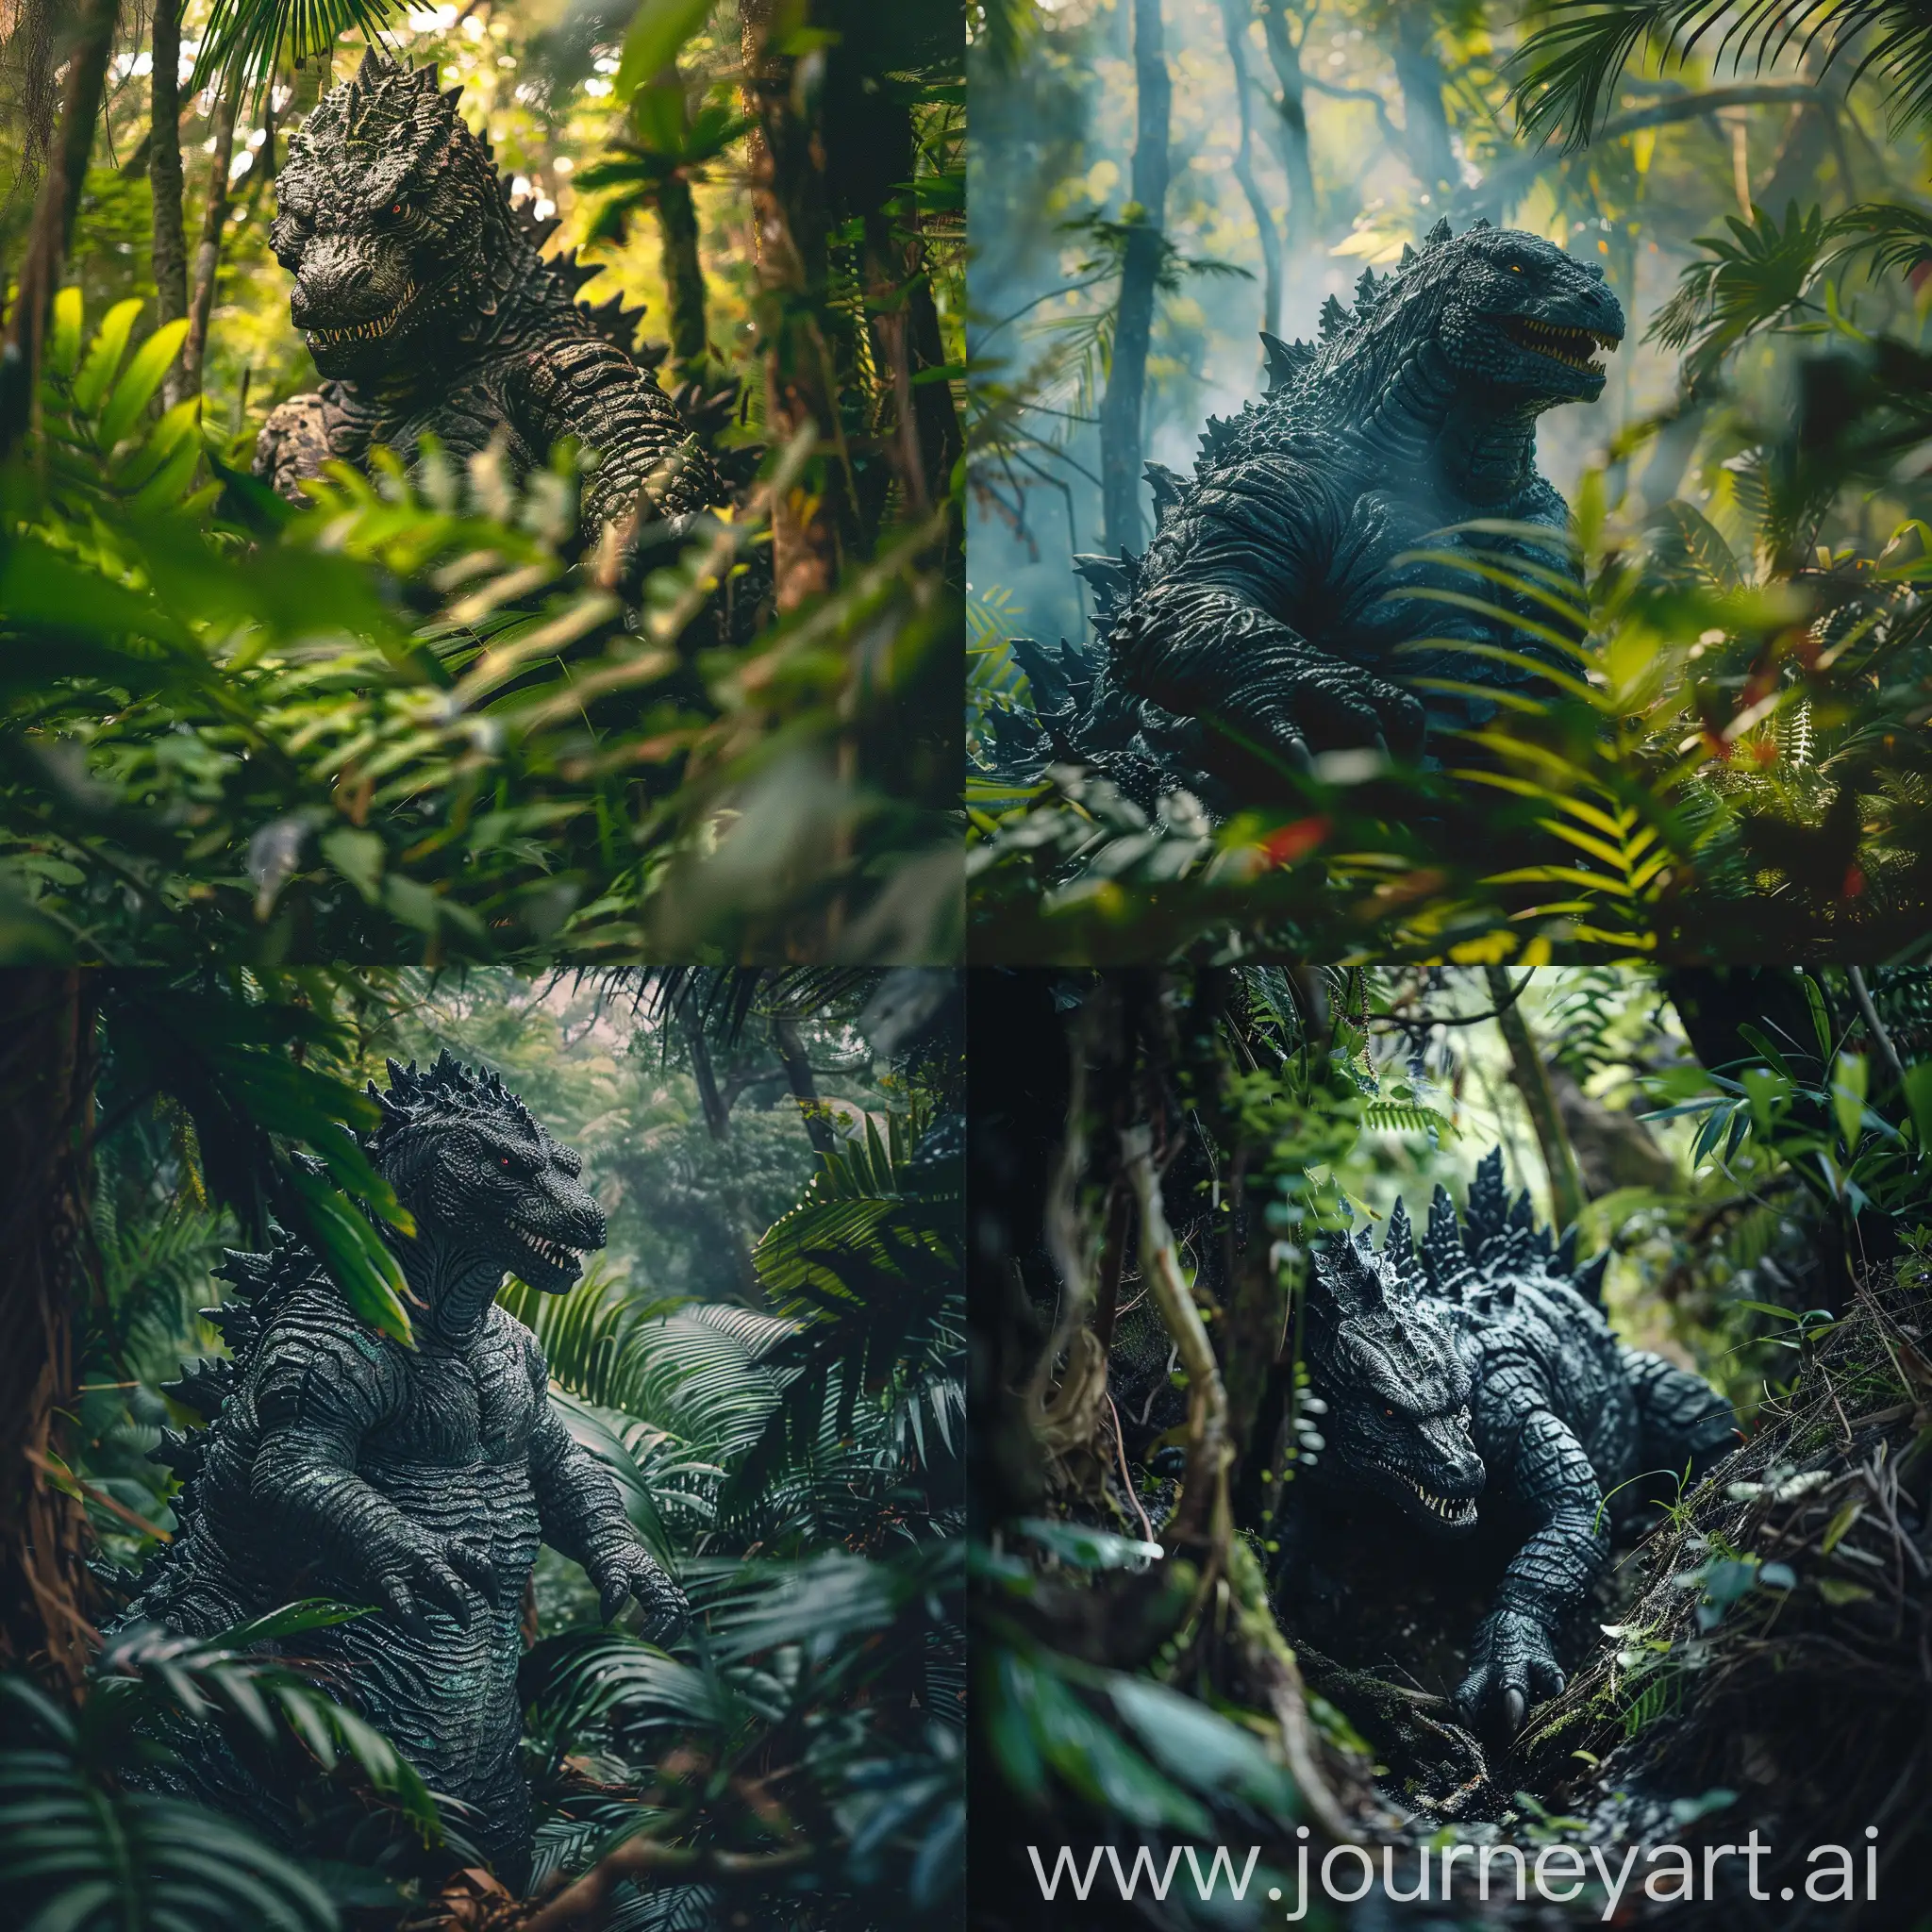 Tropical-Rainforest-Godzilla-Captured-in-Intimate-Landscape-Photography